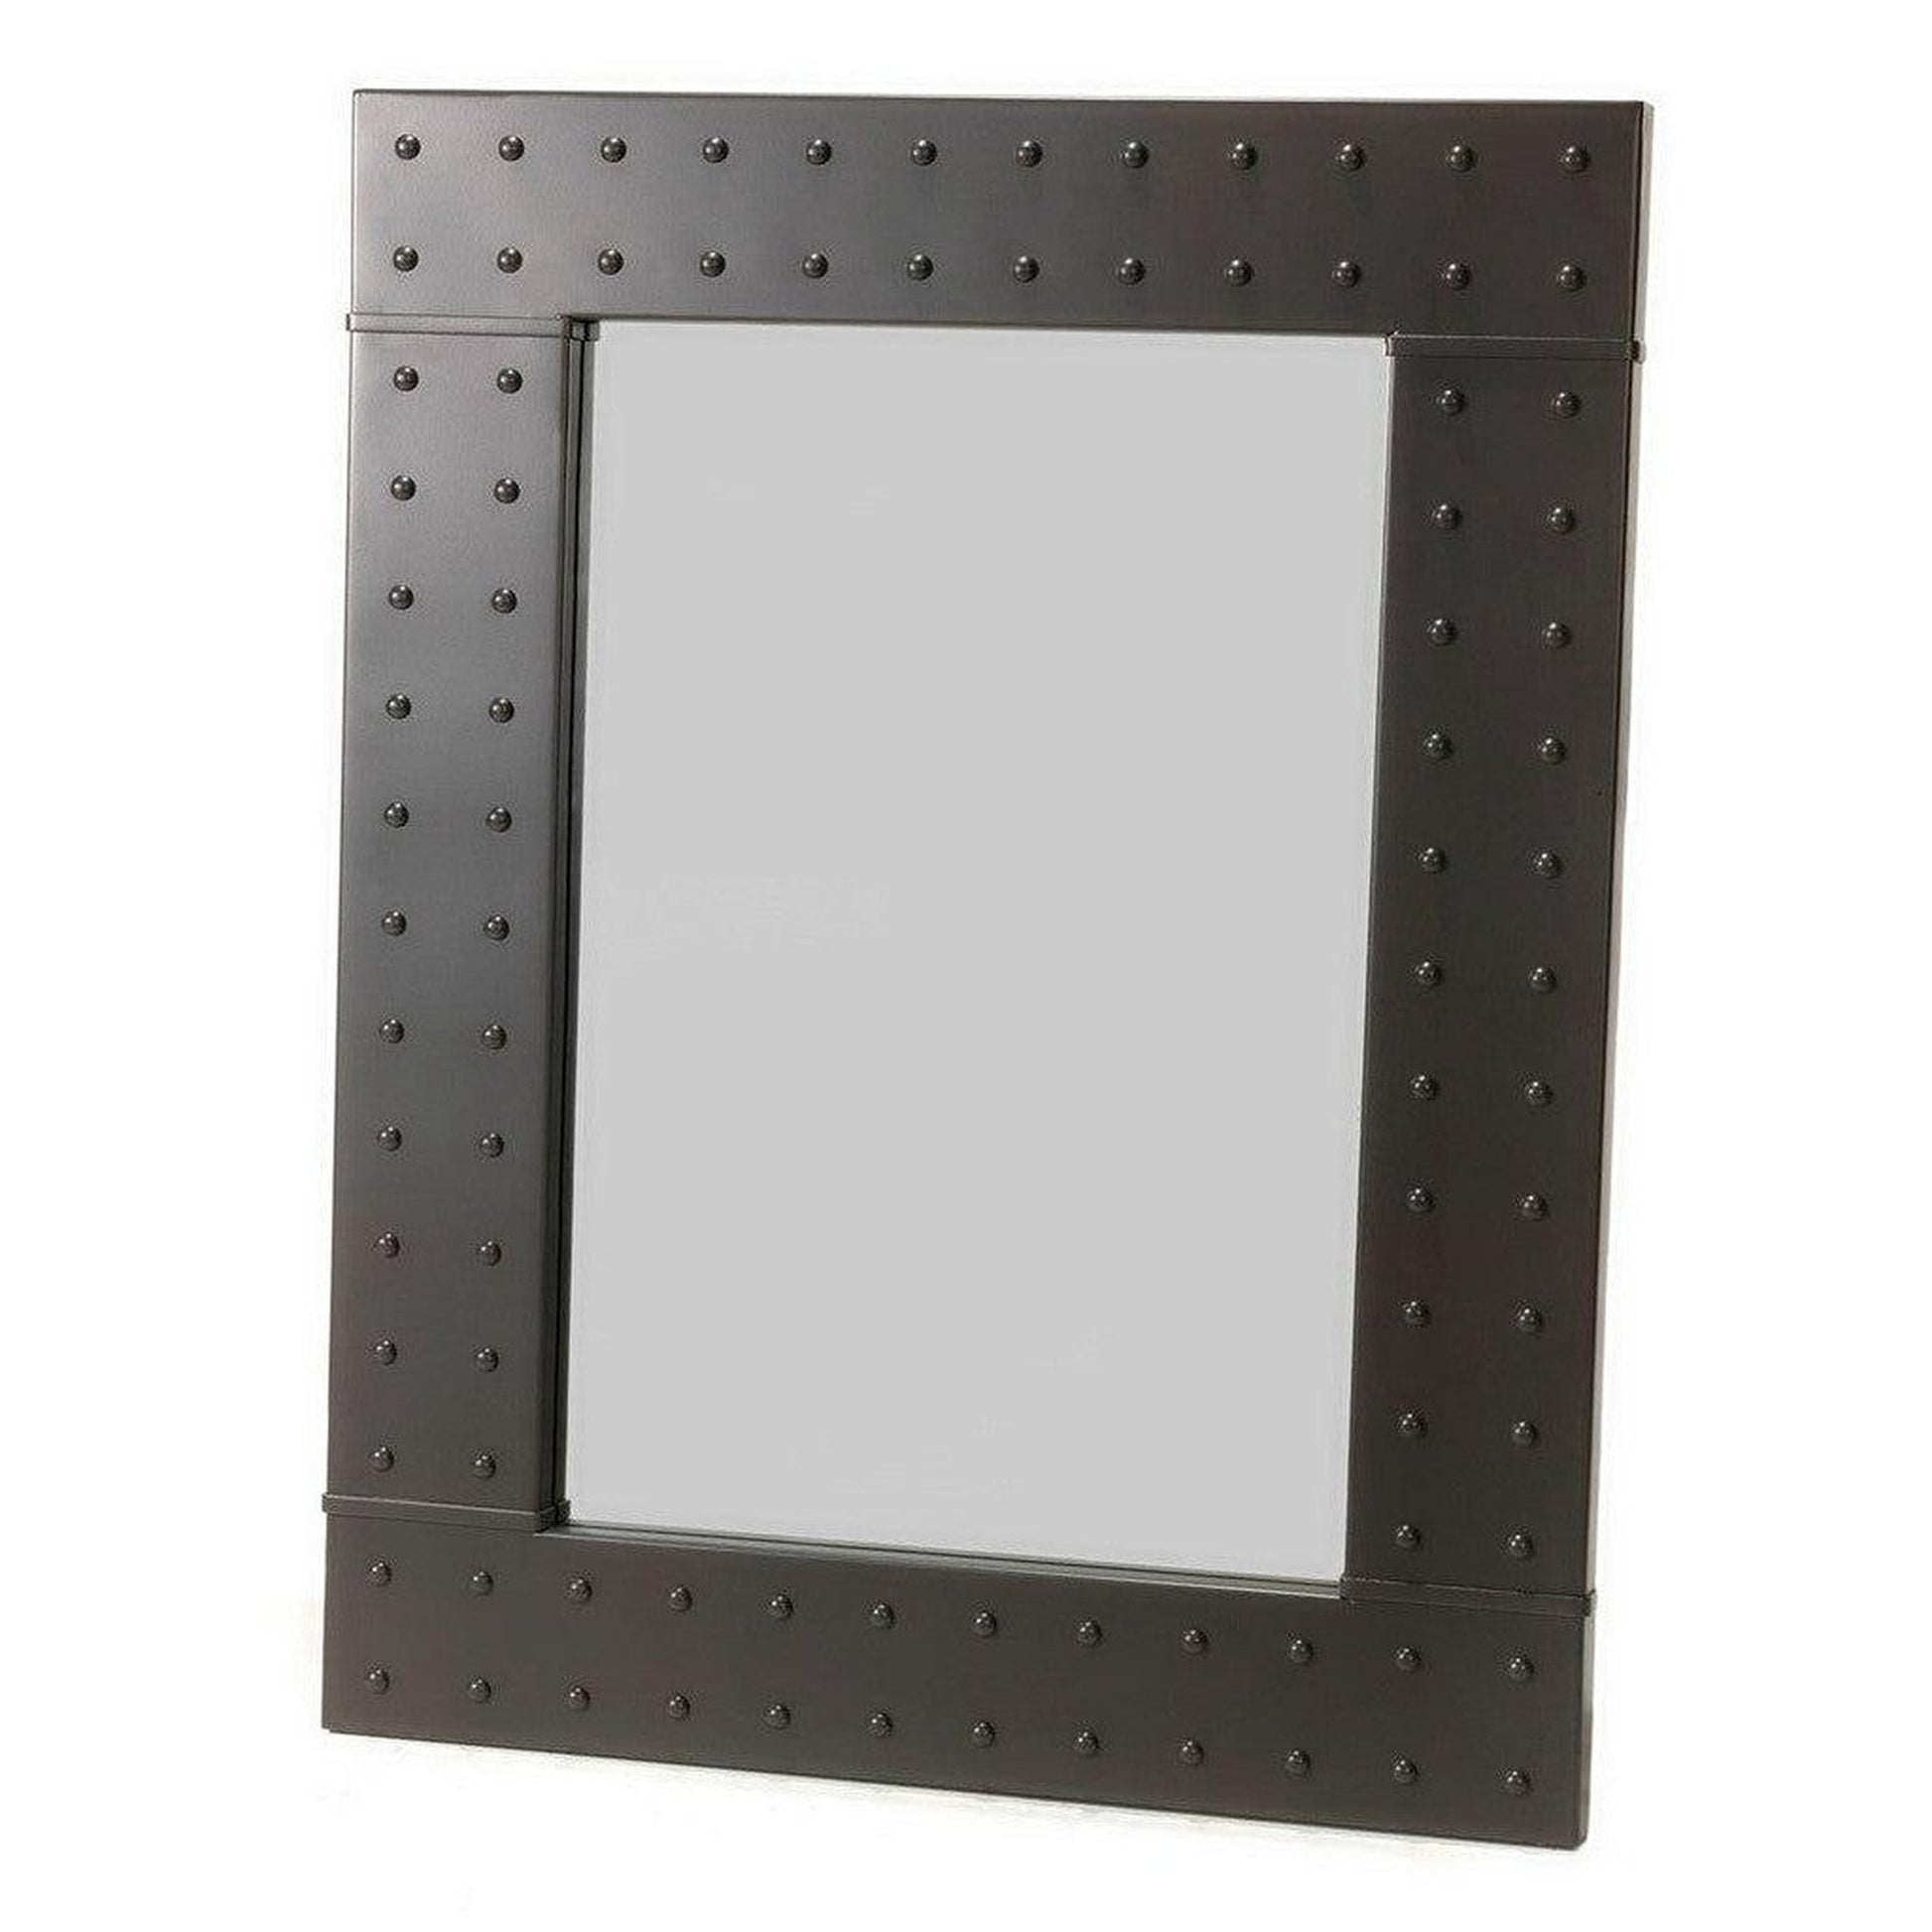 Stone County Ironworks Merrimack Rivet 36" x 45" Large Satin Black Iron Wall Mirror With Copper Iron Accent